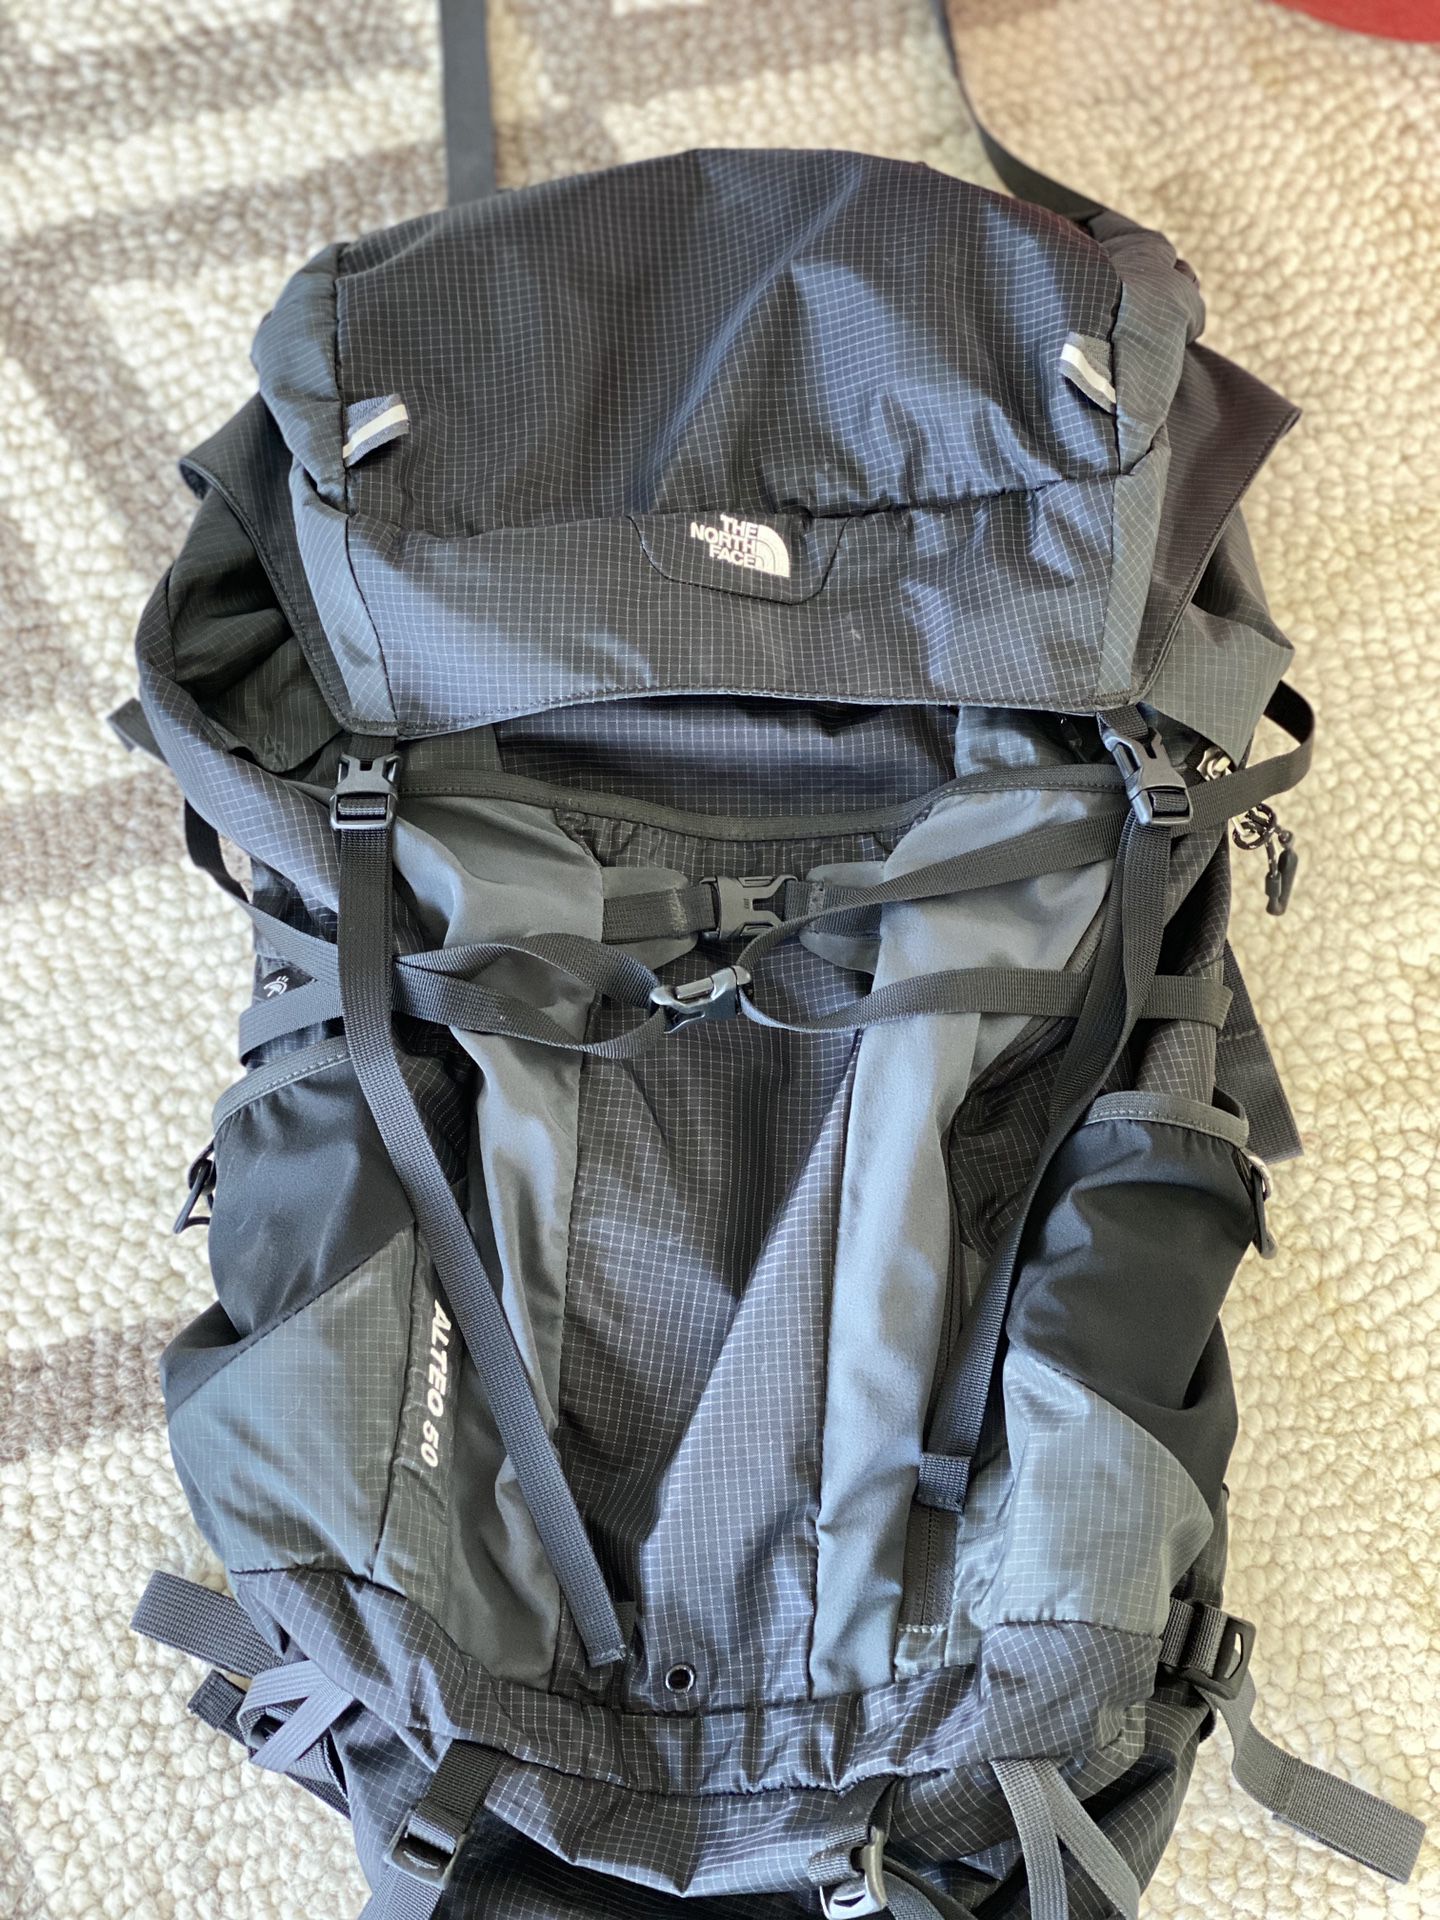 North Face Alteo 50L hiking backpack